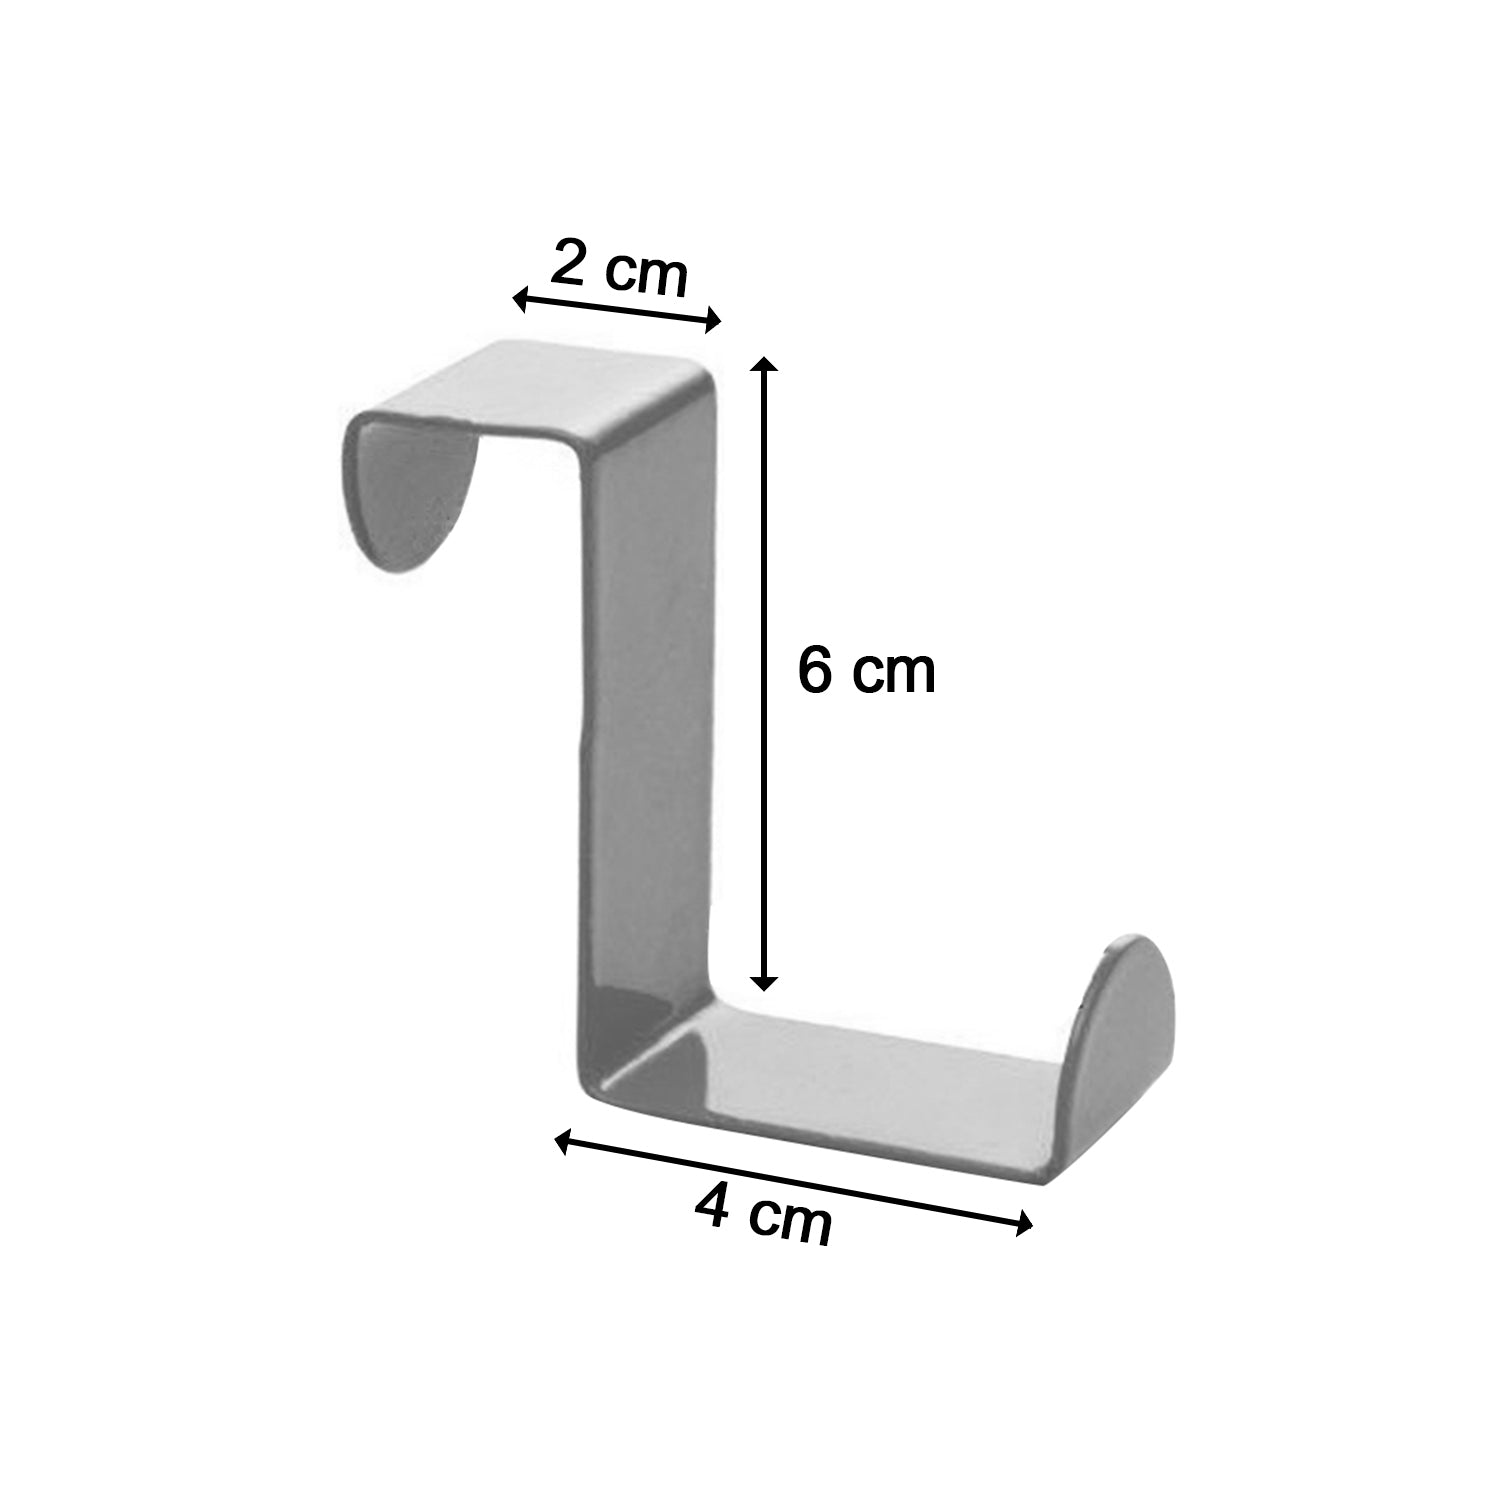 9027 1 Pc Z Shape Door Over Hook used widely in all kinds of household for hanging of cloths and fabric items etc.